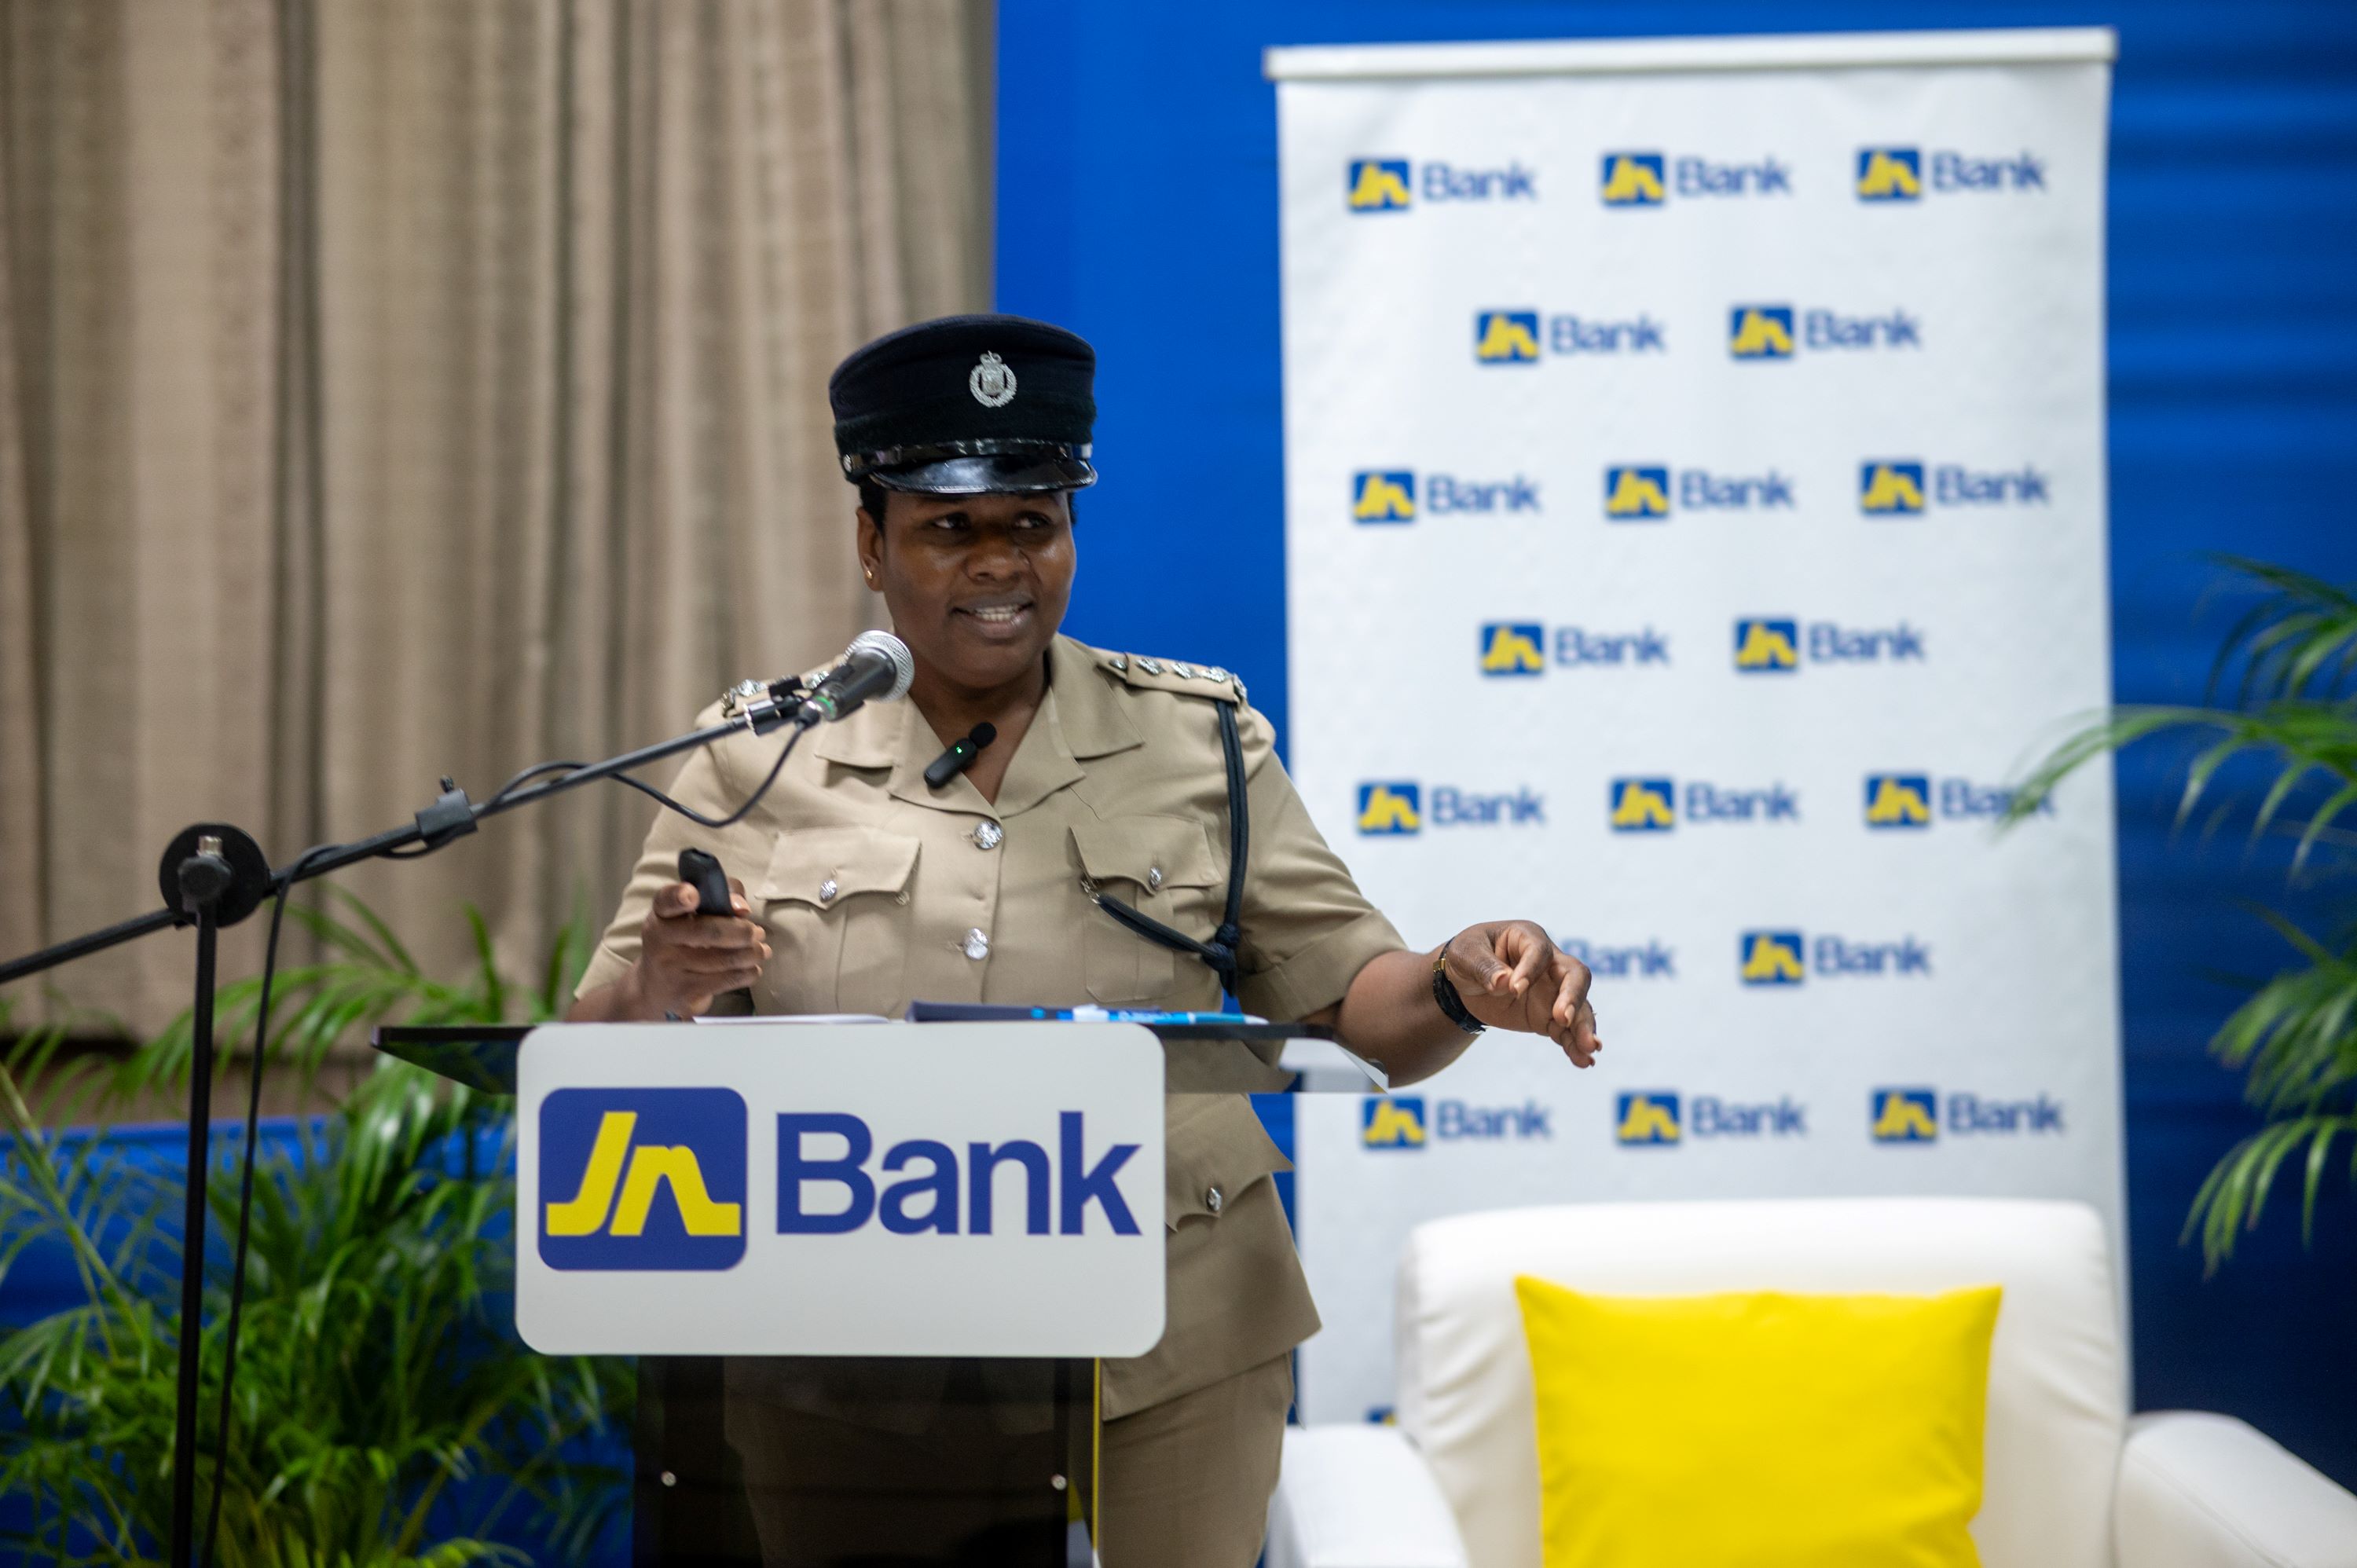 Deputy Superintendent of Police, Rochelle McGibbon-Scott makes a presentation to the members during the meeting.